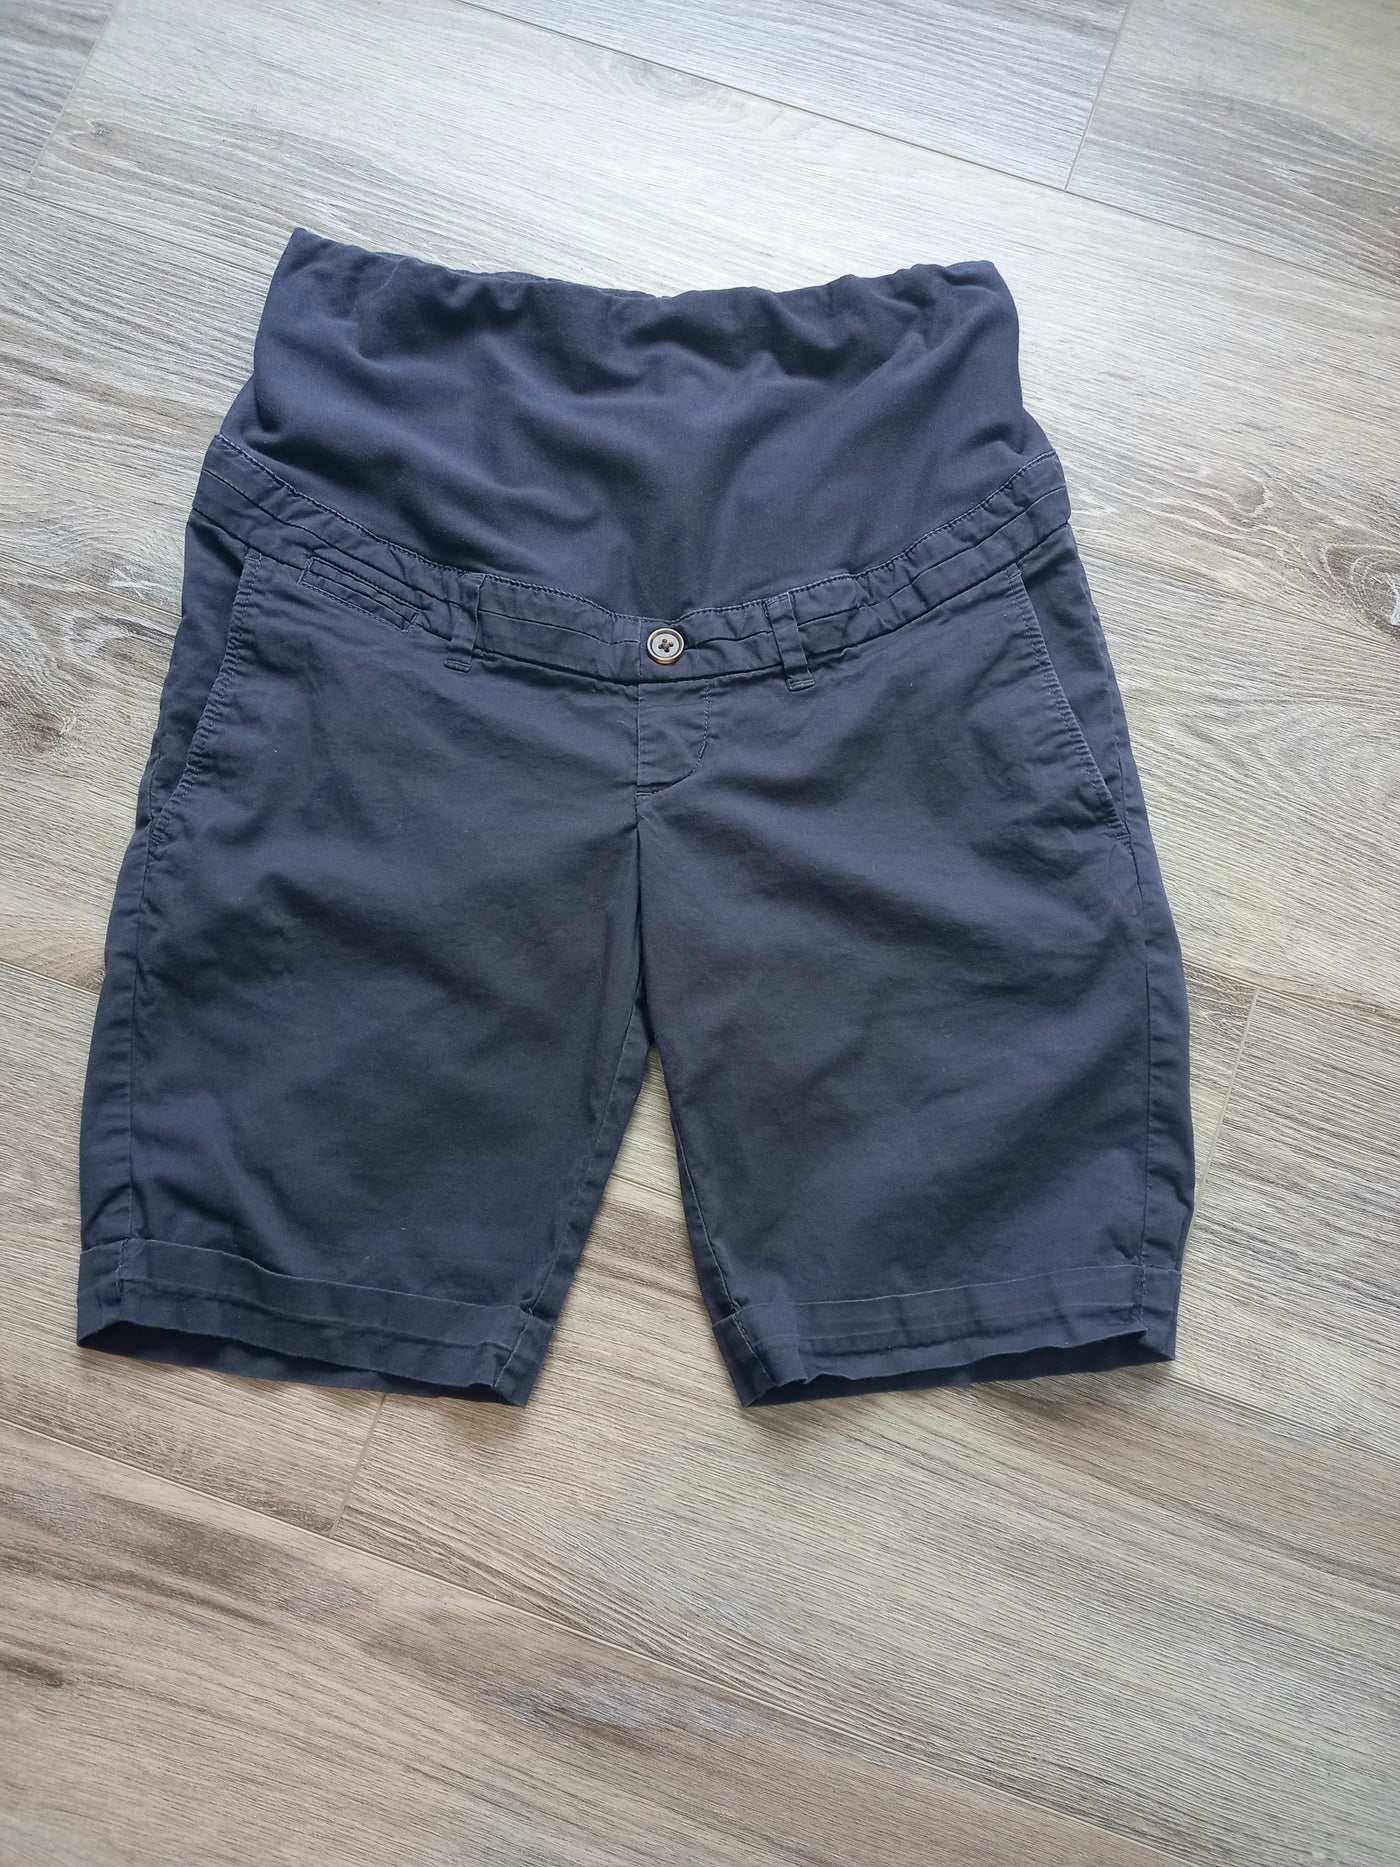 H&M Mama navy overbump shorts - Size EUR 40 (Approx UK 10/12)